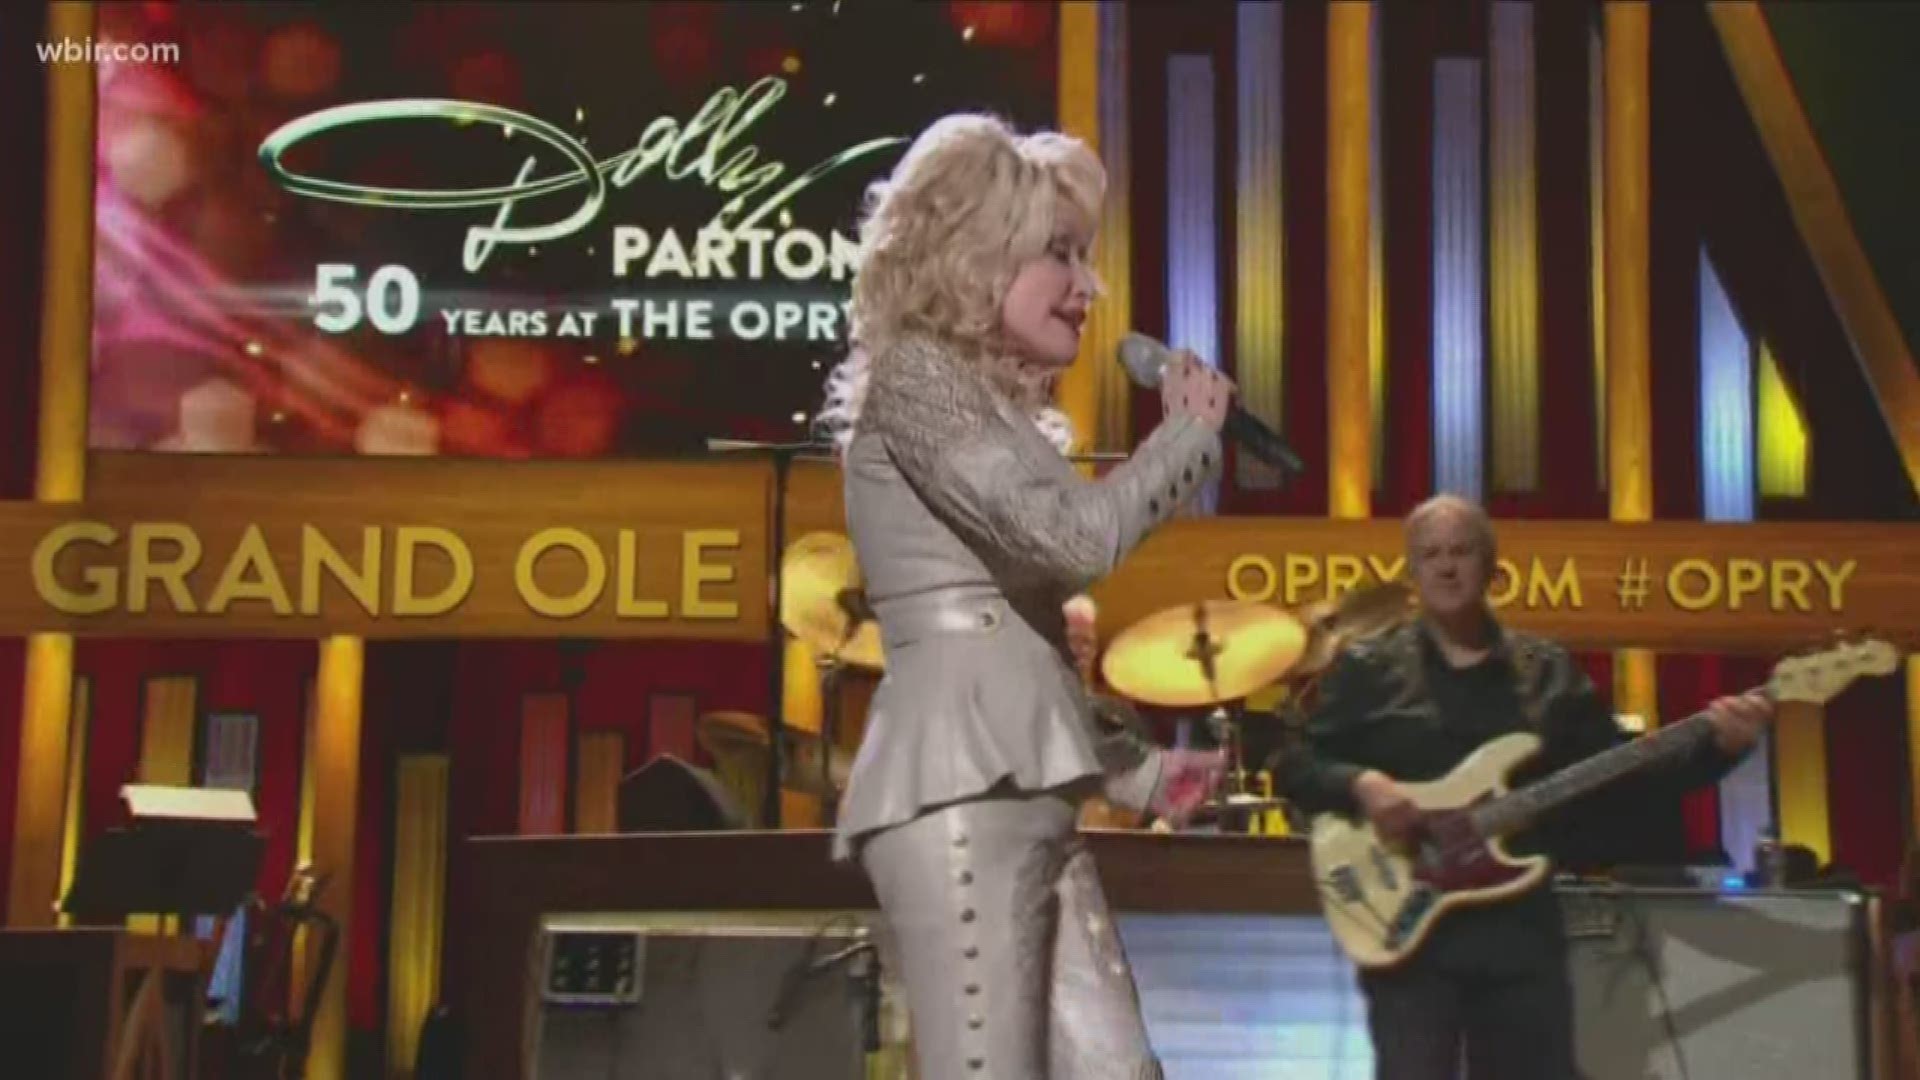 Dolly Parton celebrates 50th anniversary at the Grand Ole Opry